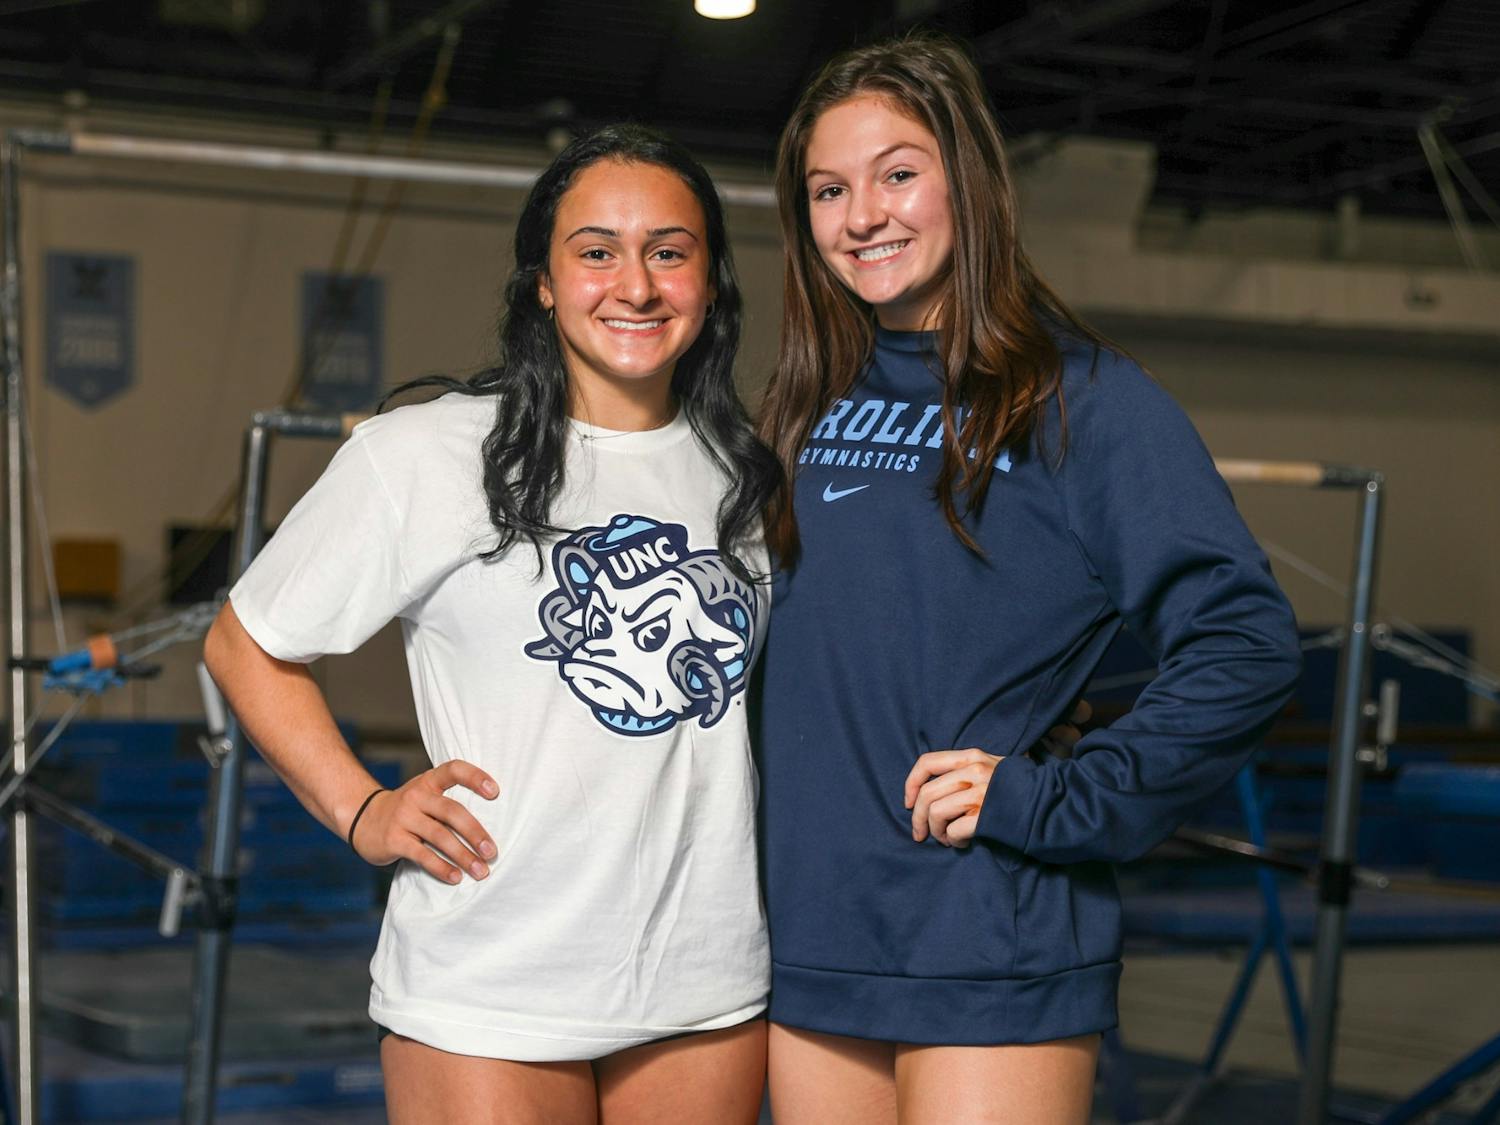 First-year gymnasts Julia Knower and Lali Dekanoidze pose in the practice gym on Thursday, Jan. 27, 2022.